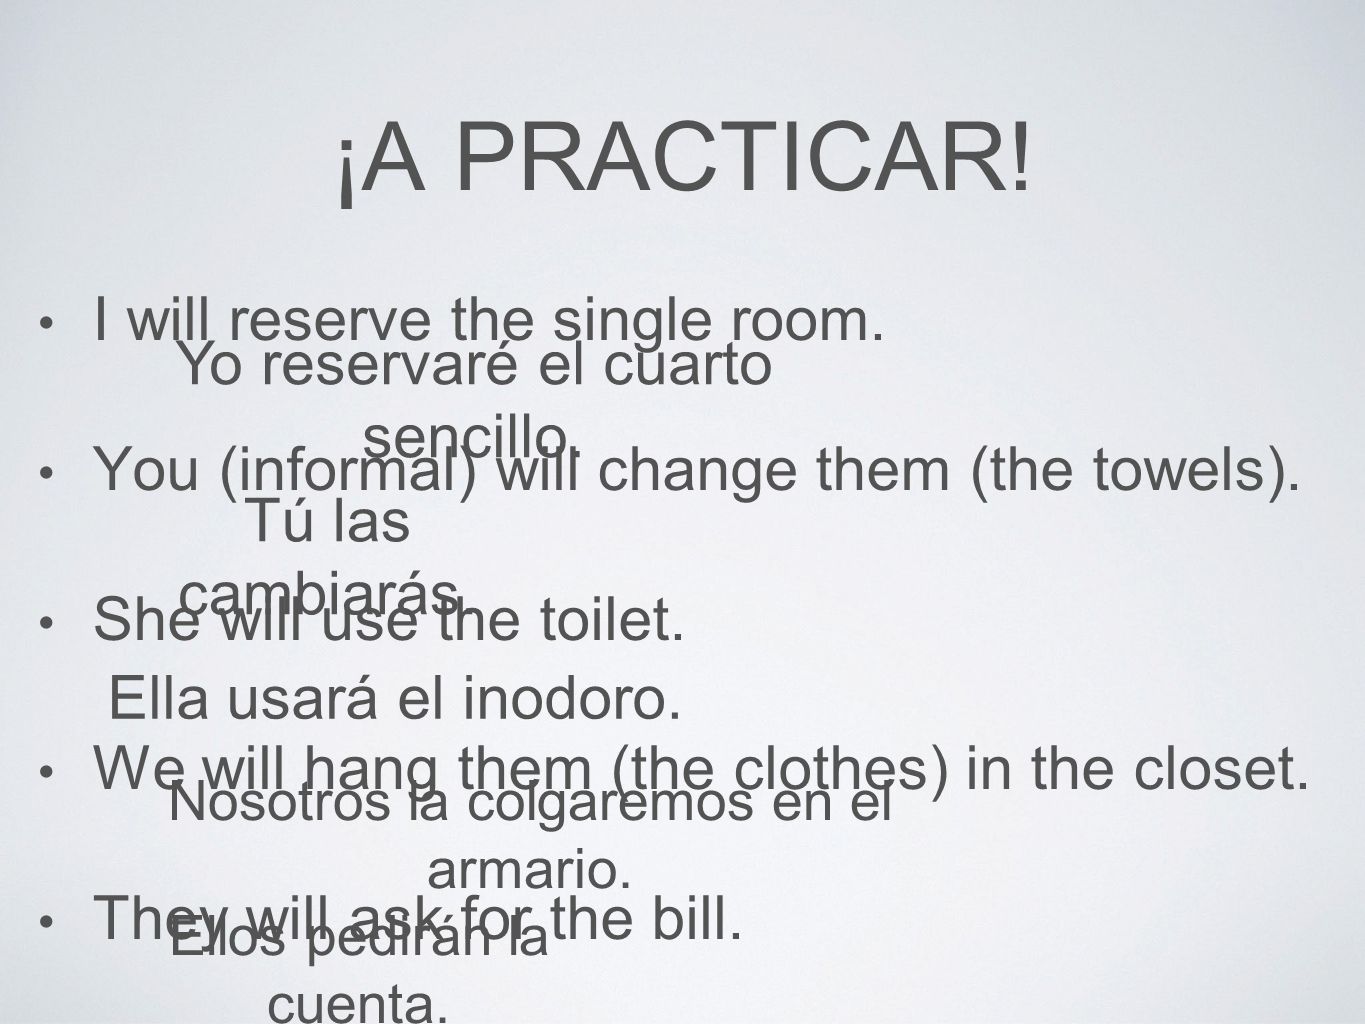 ¡A PRACTICAR. I will reserve the single room. You (informal) will change them (the towels).